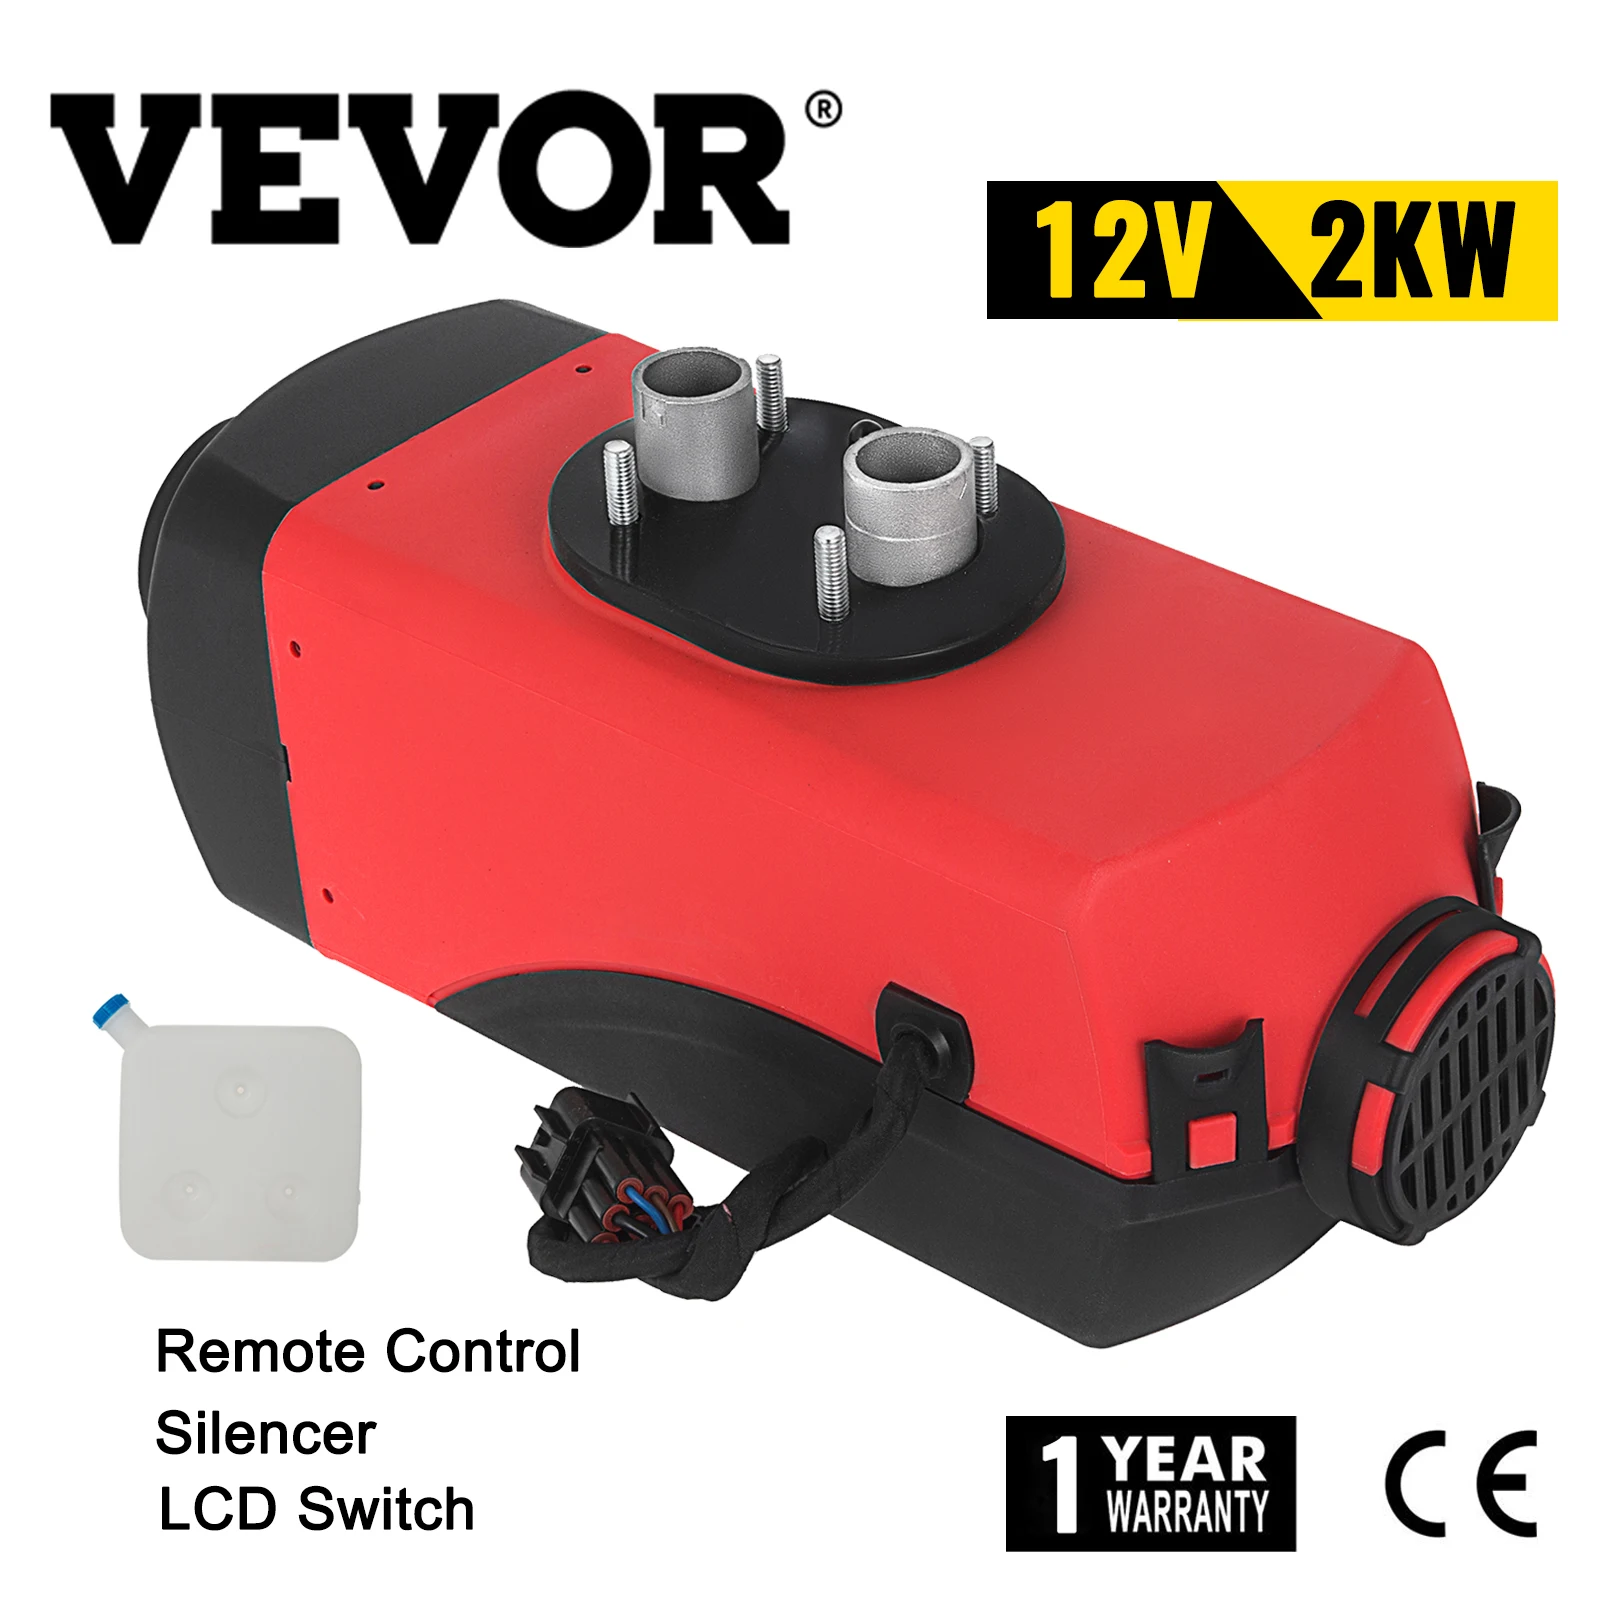 

VEVOR 2KW 12V Diesel Air Heater with LCD Switch Silencer Remote Control 5 / 10 L Tank for Car RV Trailer Truck Various Vehicles